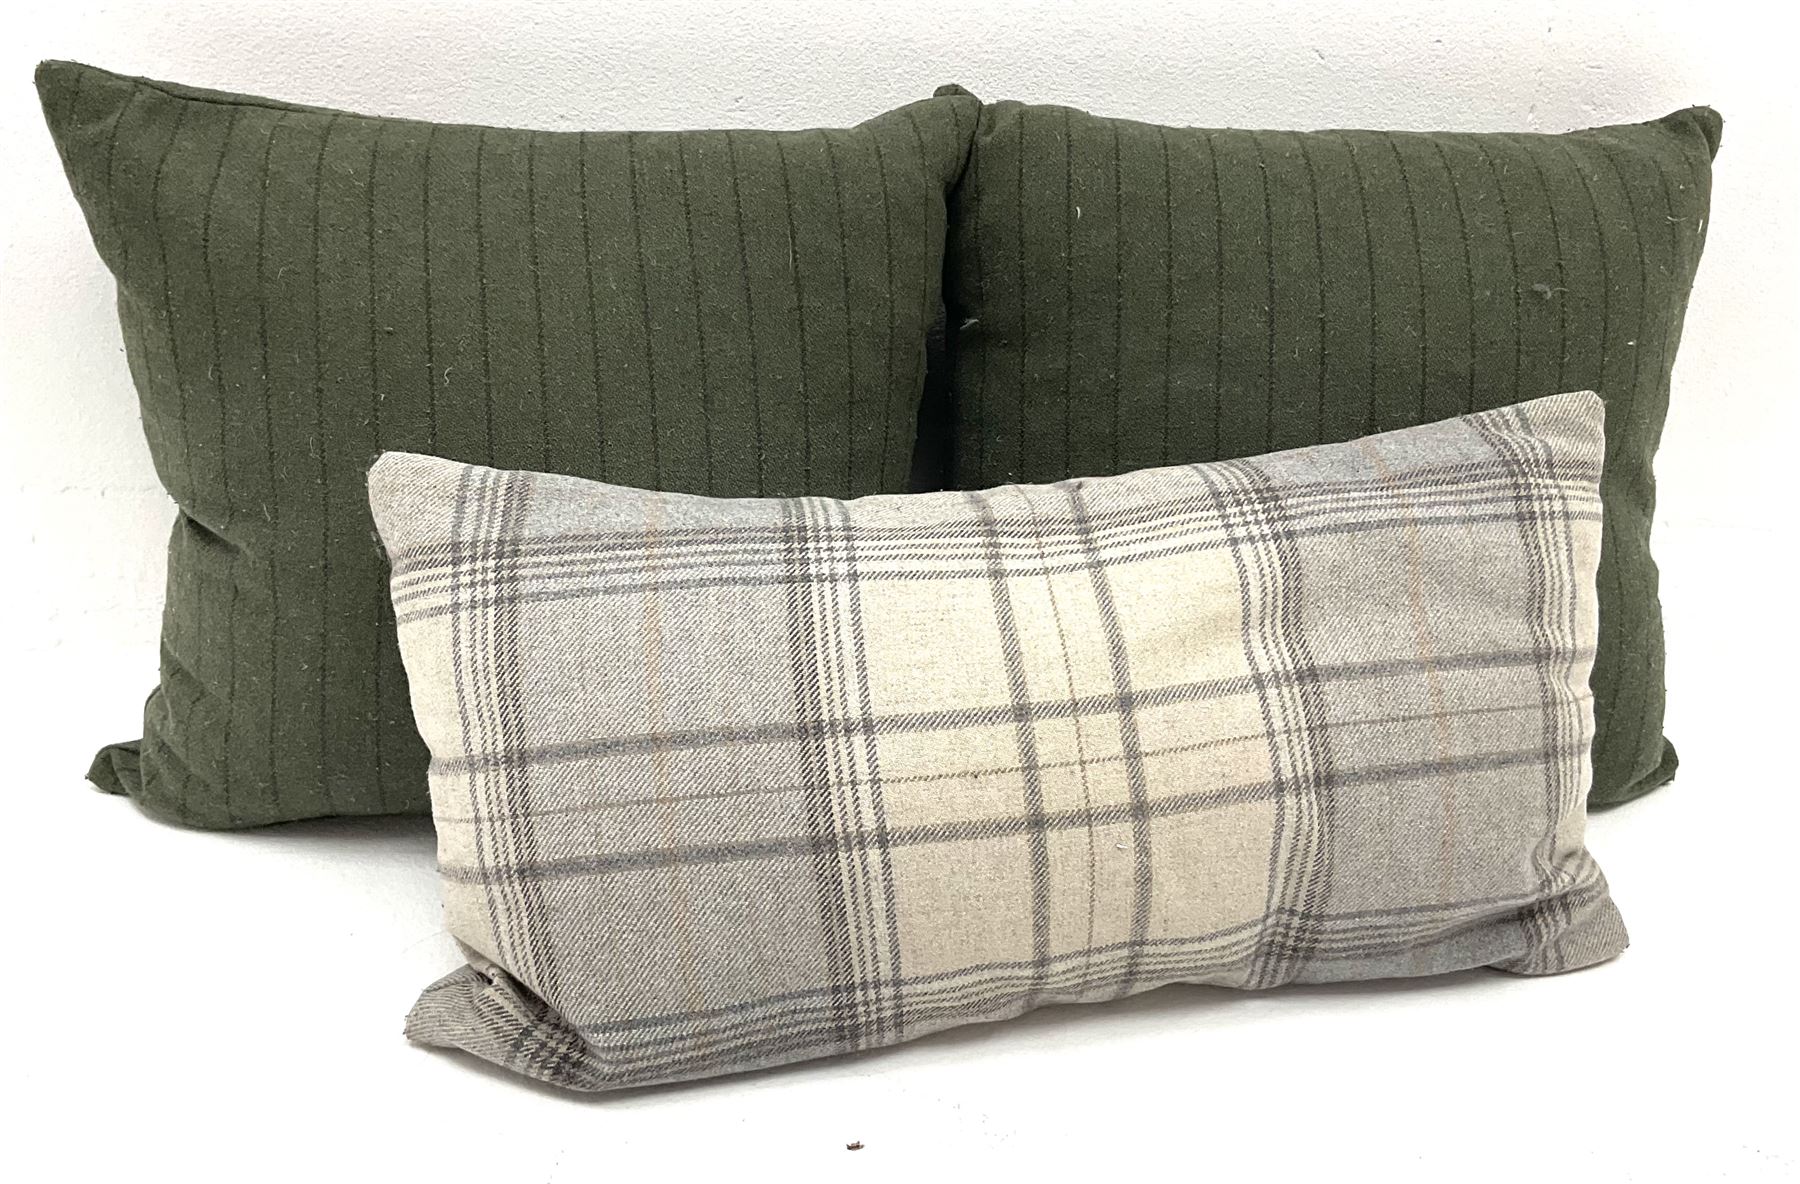 Aspen three seat sofa upholstered in a tweed style fabric - Image 4 of 5